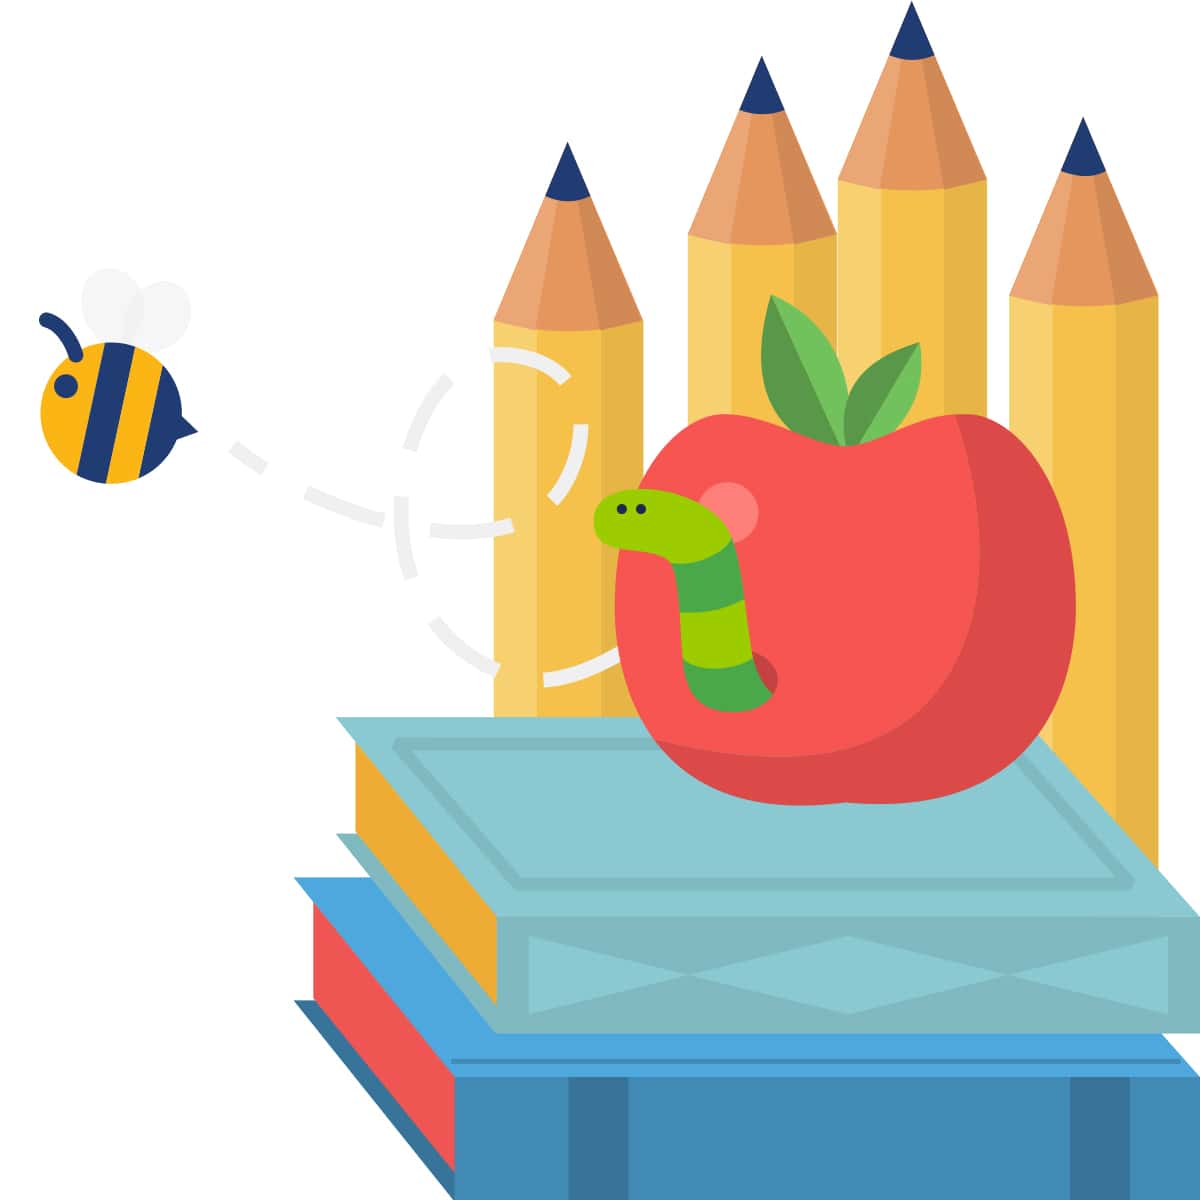 Illustrated bee and worm inside an apple with books and pencils.